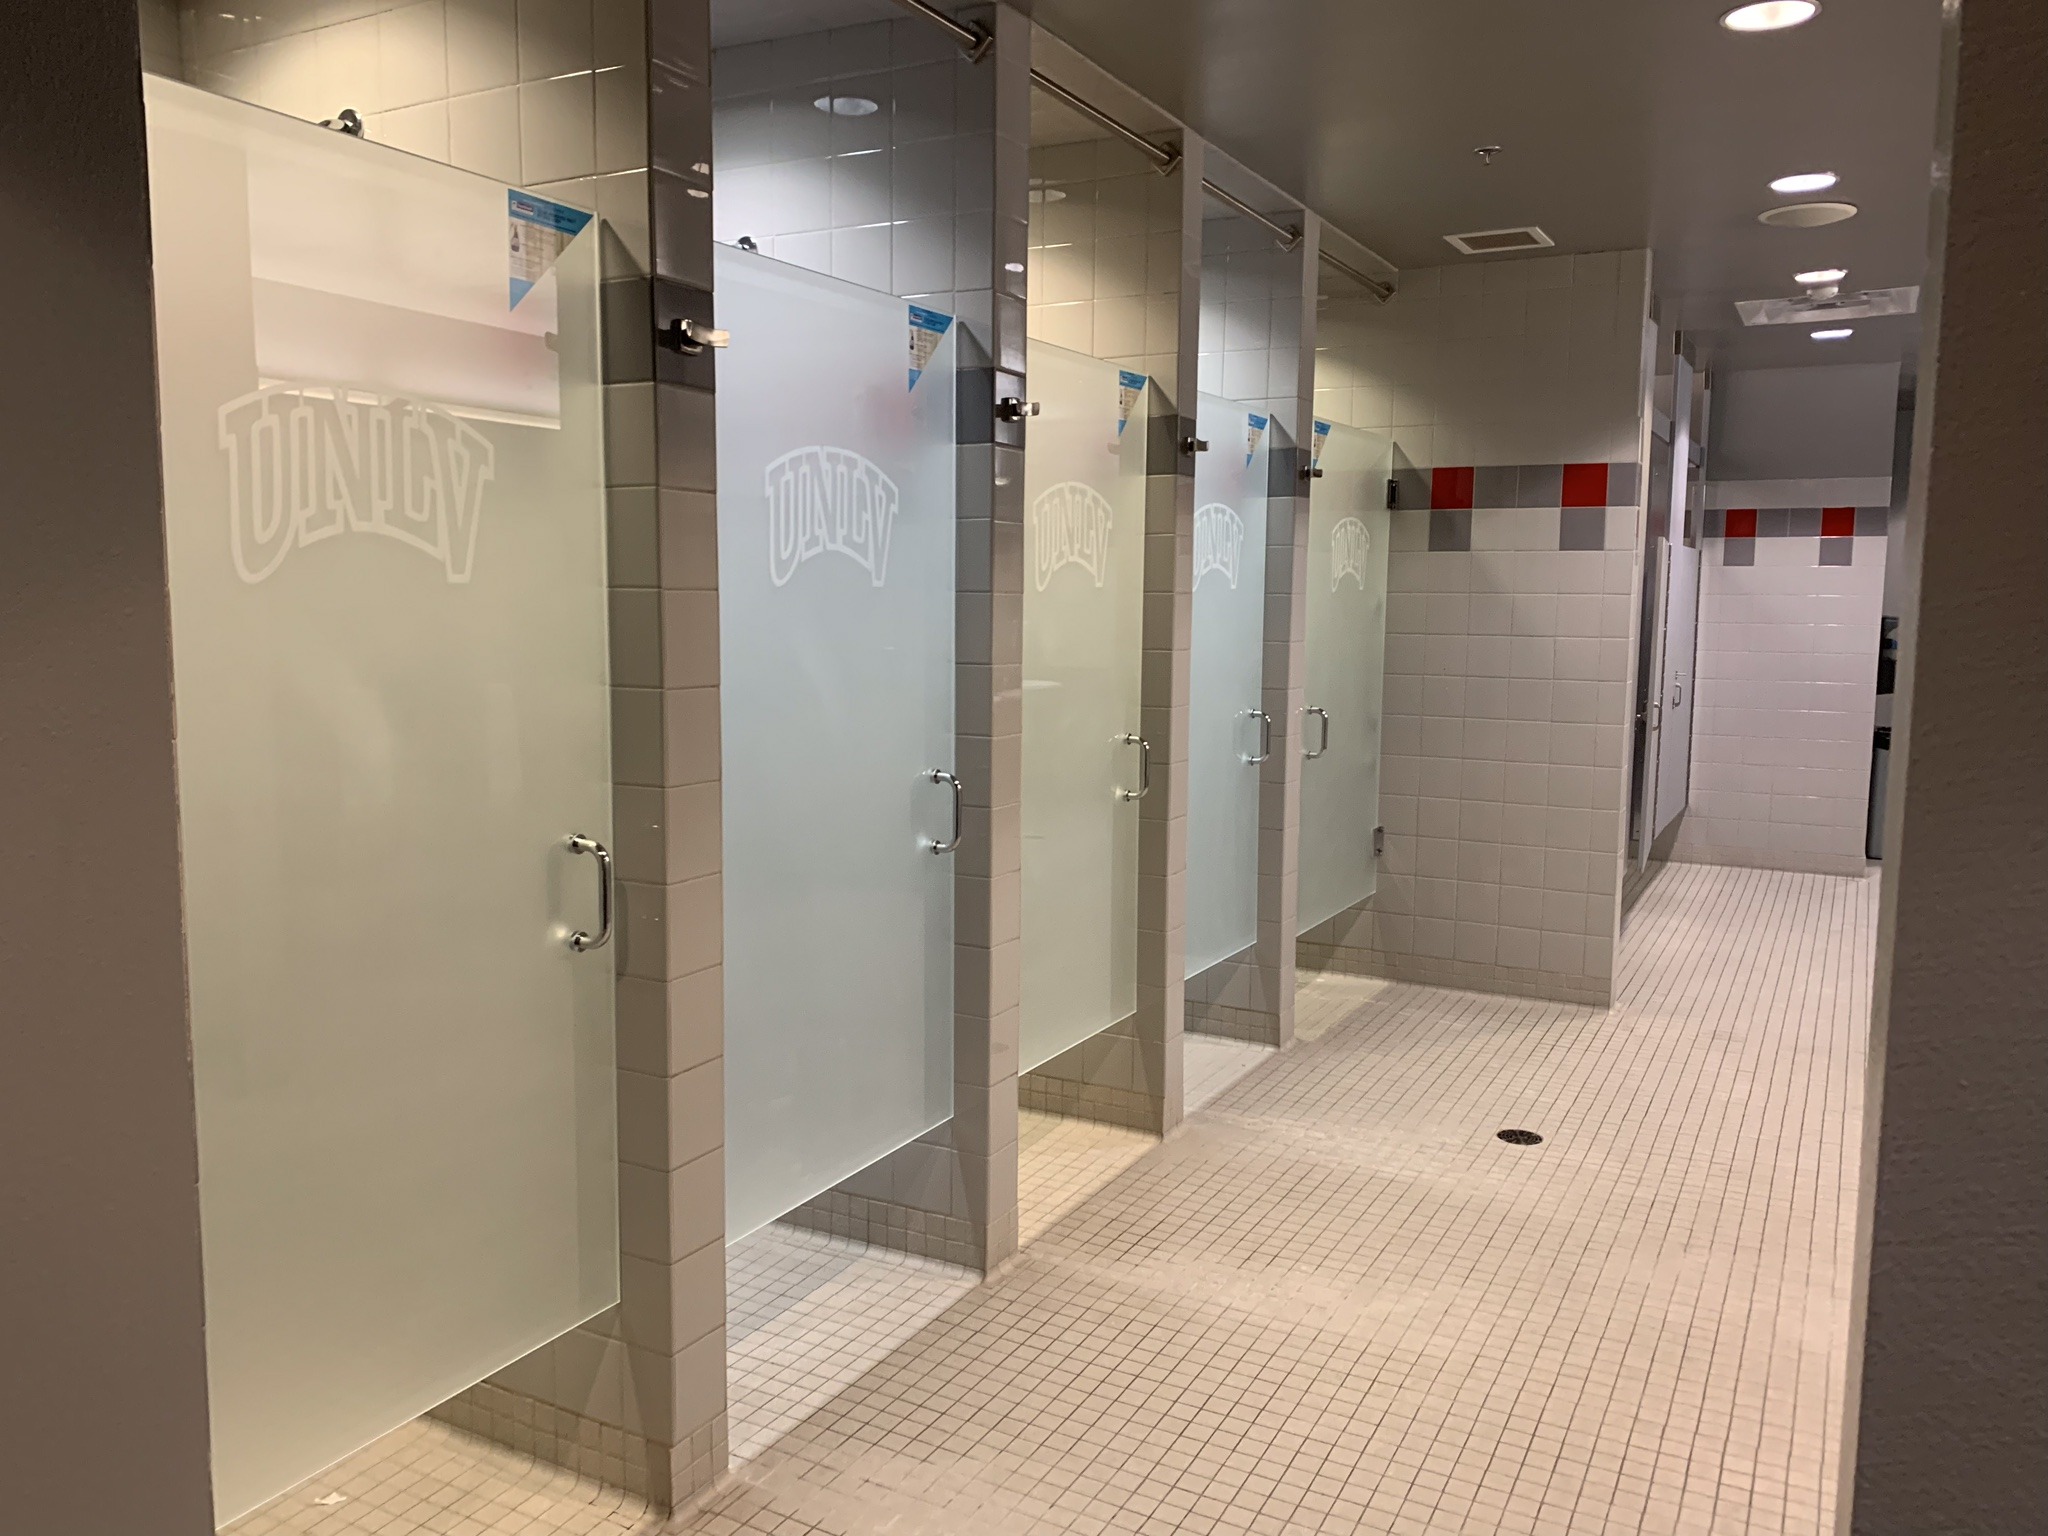 Las Vegas Athletic Clubs to close locker rooms, showers